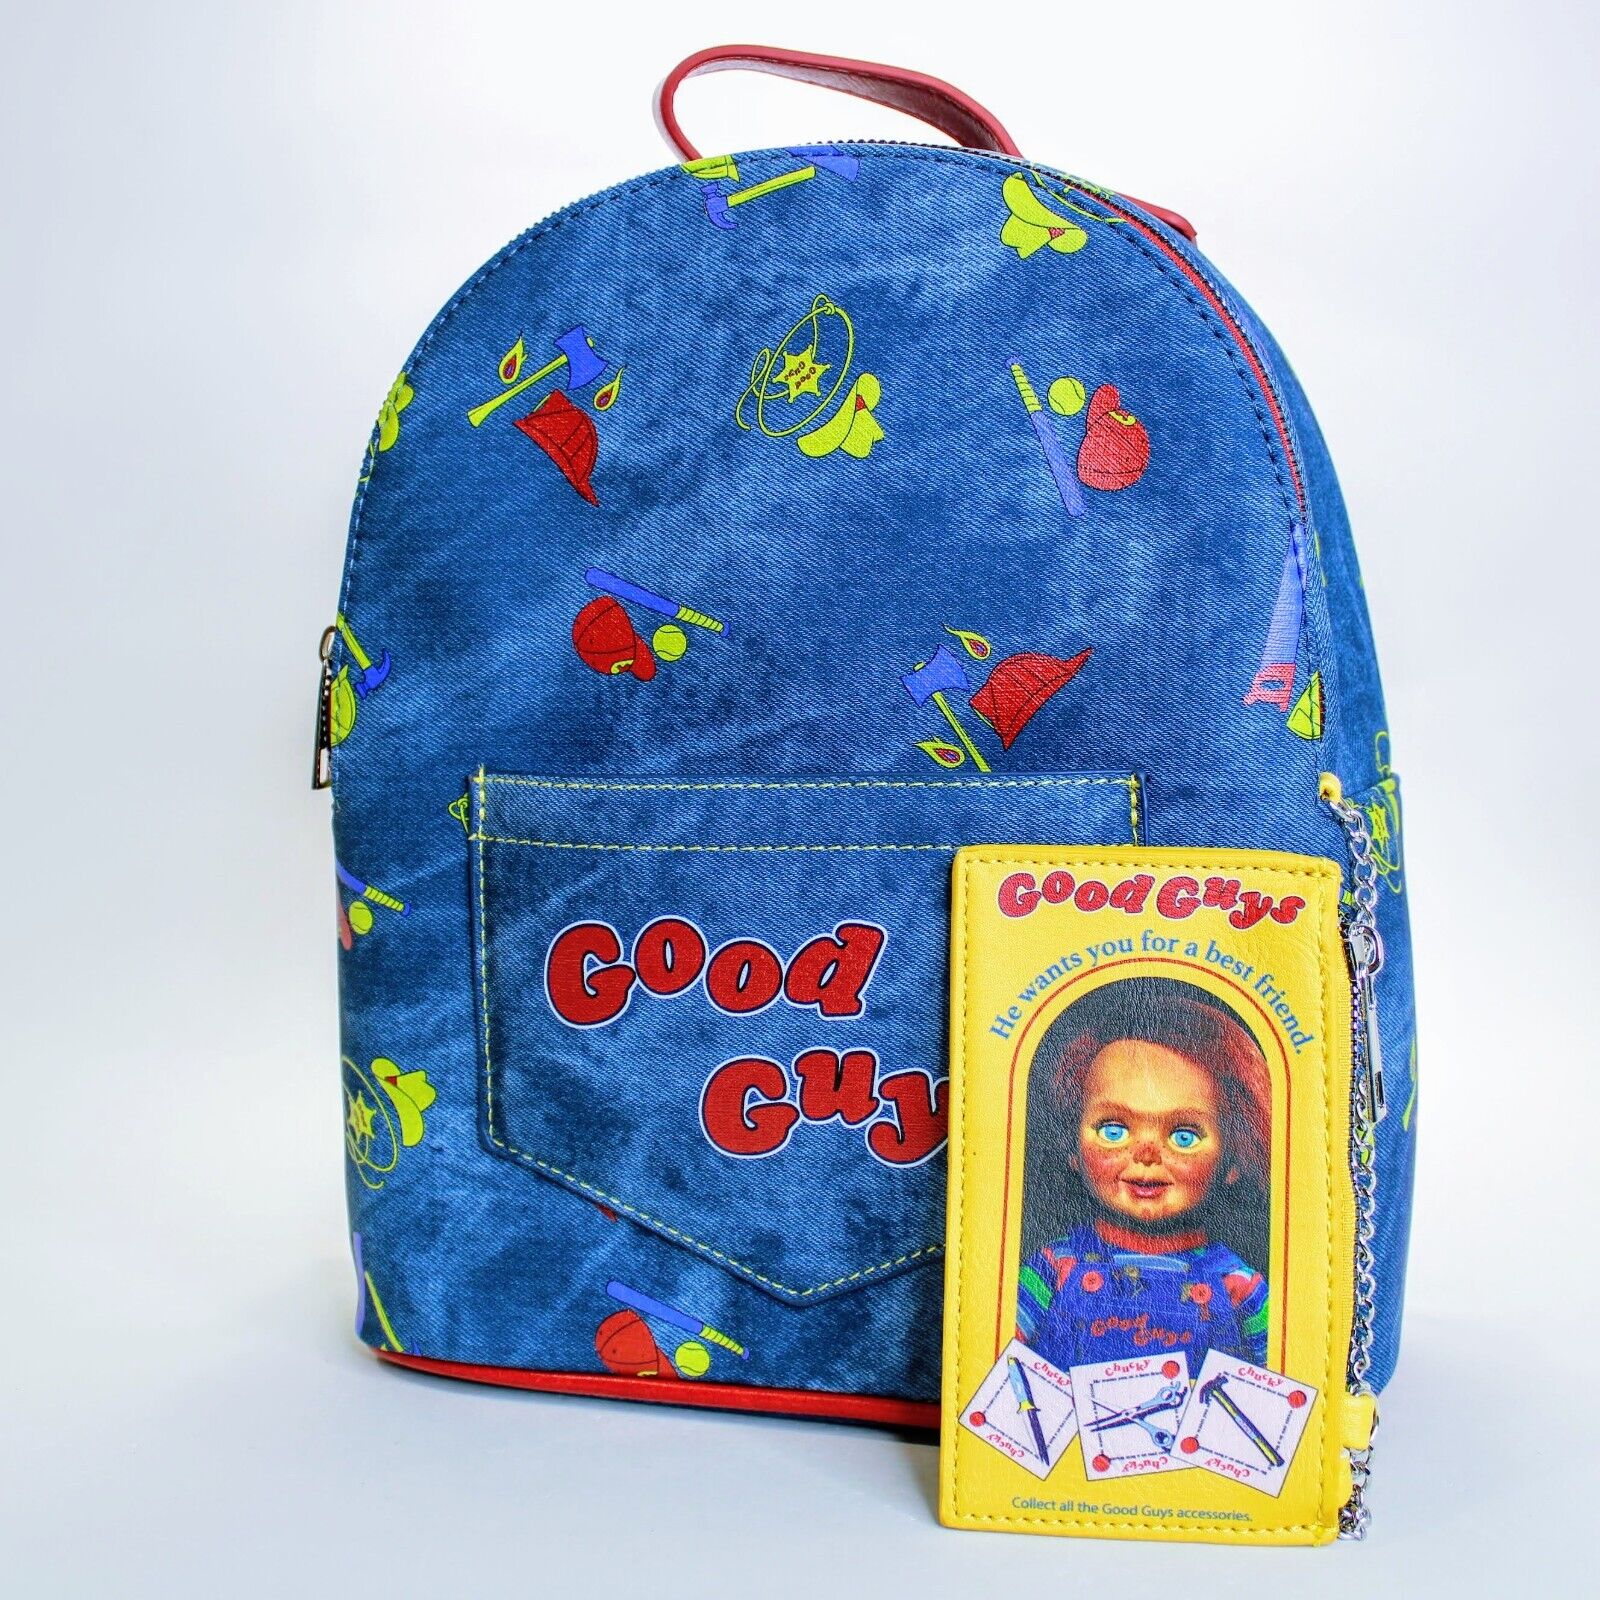 Chucky Child's Play Amigo 11" Horror Mini-Backpack Good Guys Exclusive w/ Wallet